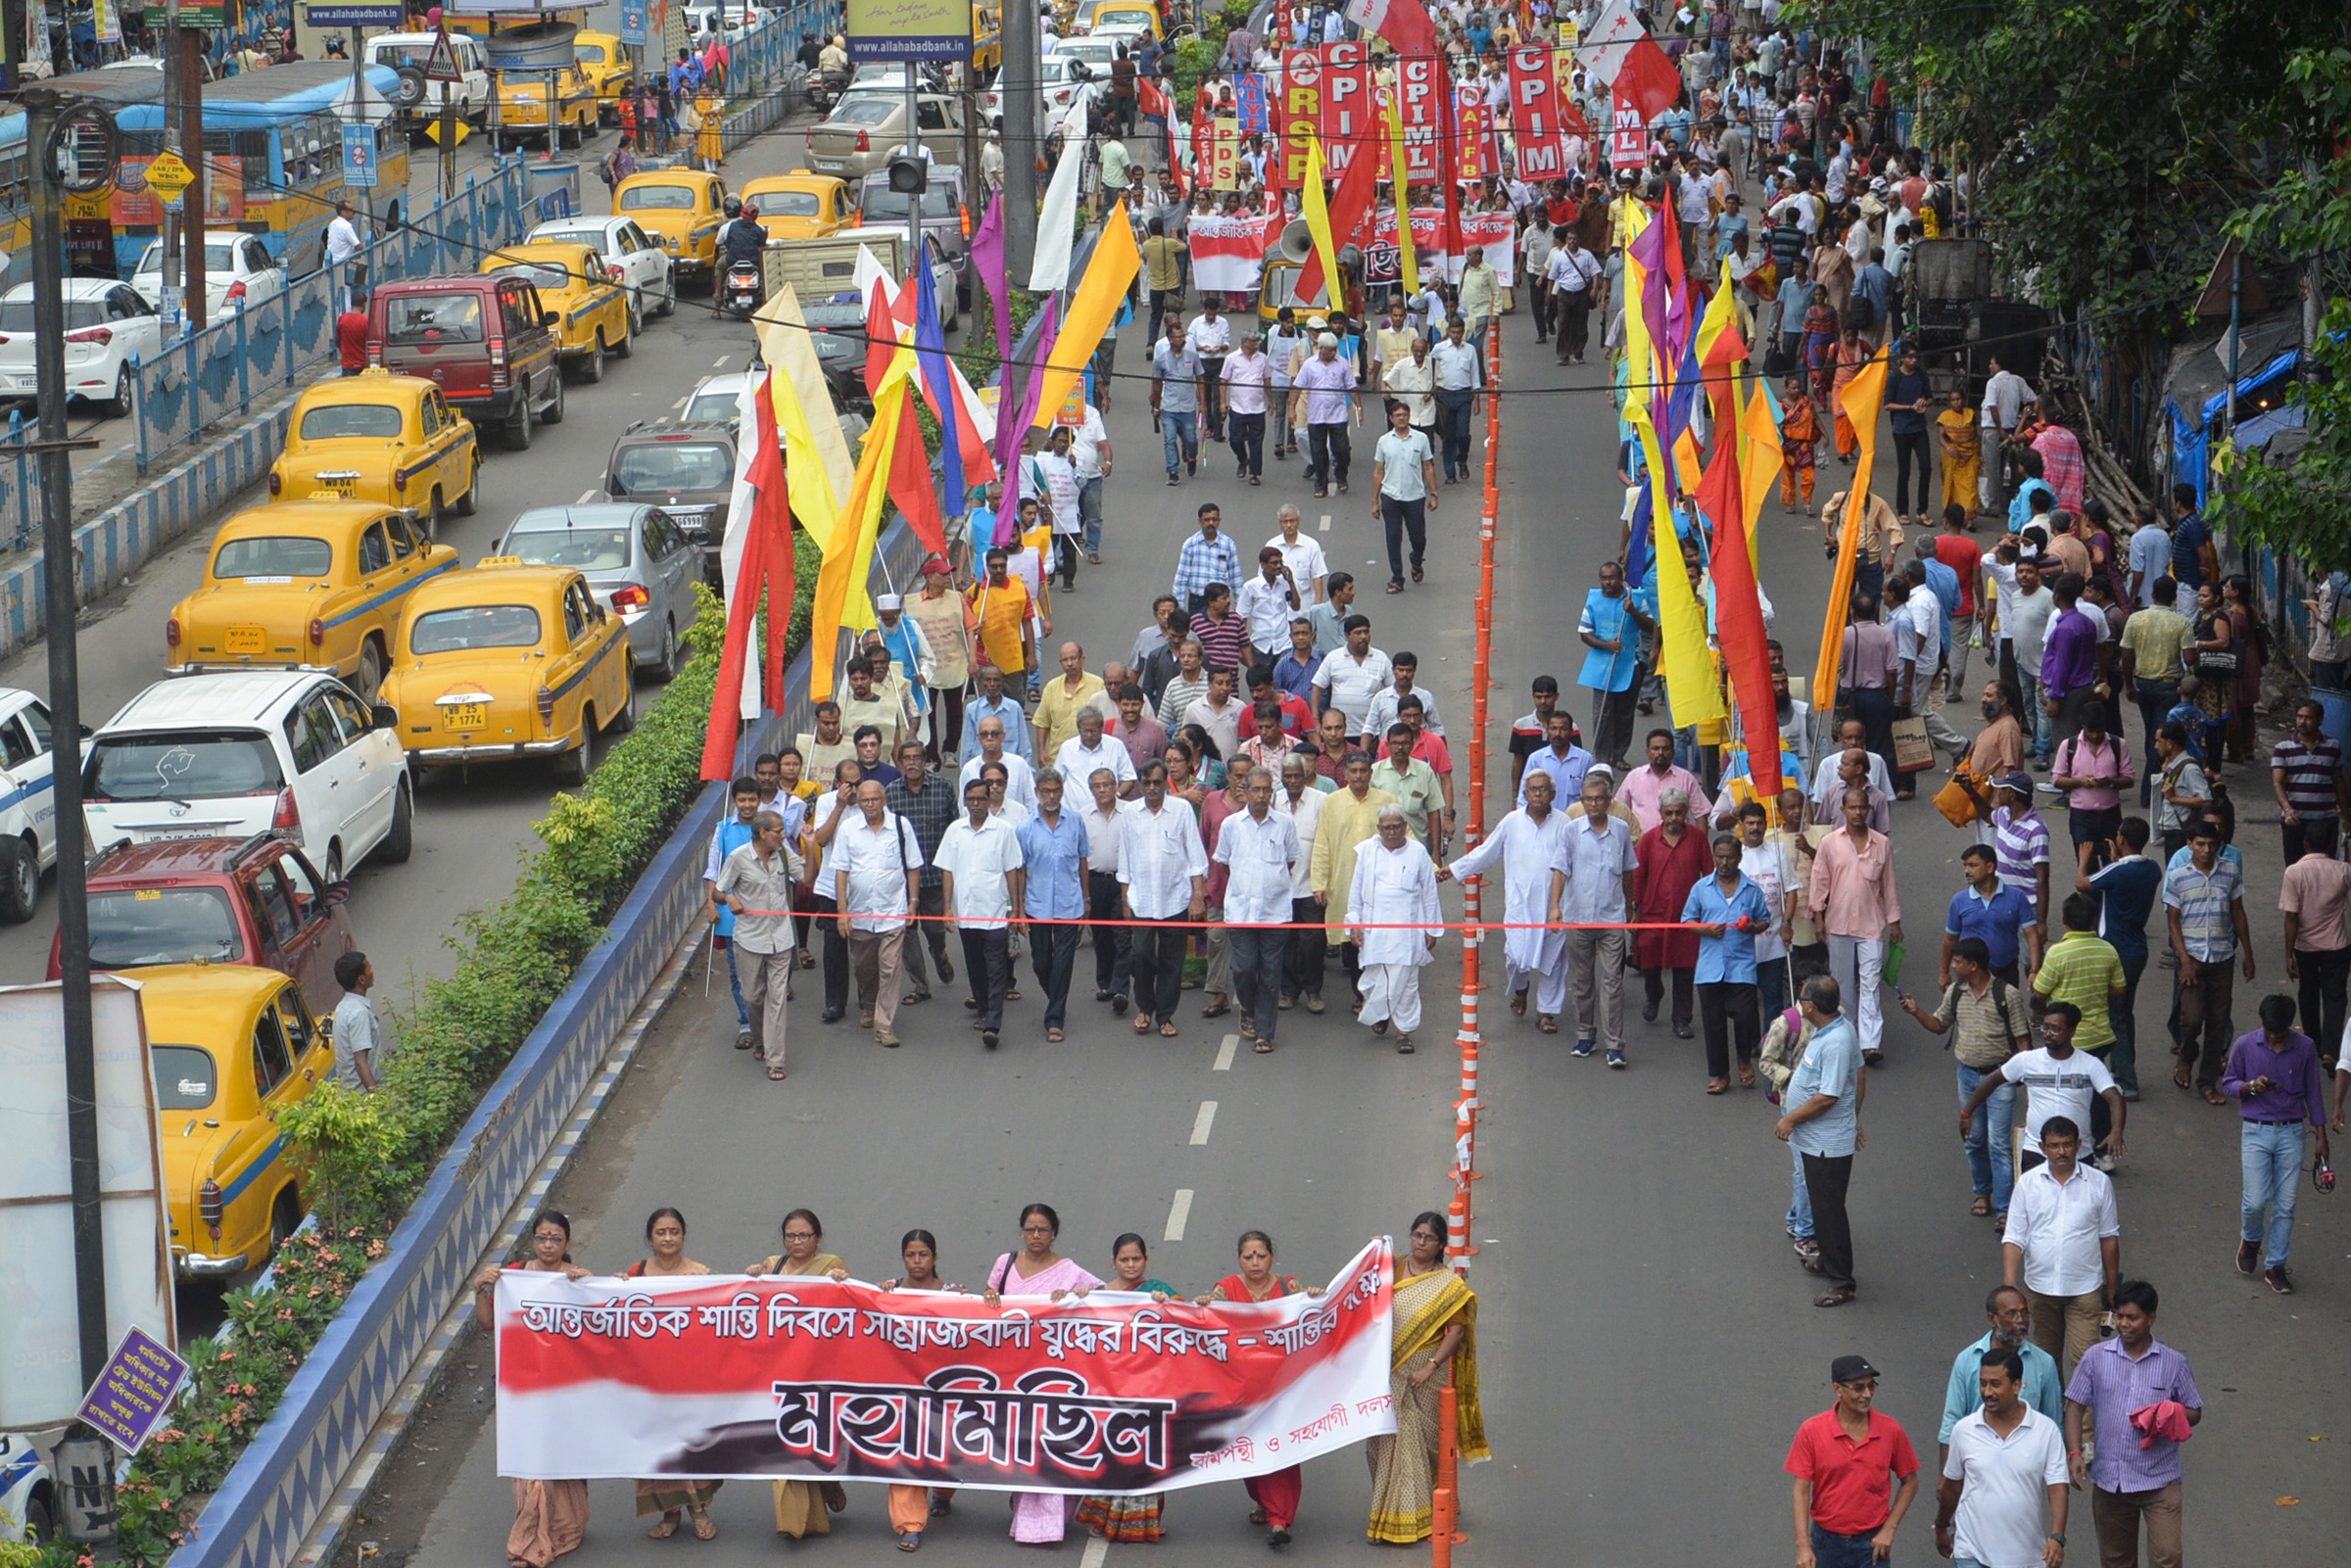 Activists participate in a world peace rally and protest against the arrest of five human rights activists—Arun Ferreira, Sudha Bharadwaj, Gautam Navlakha, Vernon Gonsalves, and P. Varavara Rao—in connection with the Bhima-Koregaon violence by Maharashtra Police on Sept. 1, 2018 in Kolkata. (Debajyoti Chakraborty—NurPhoto/Getty Images)